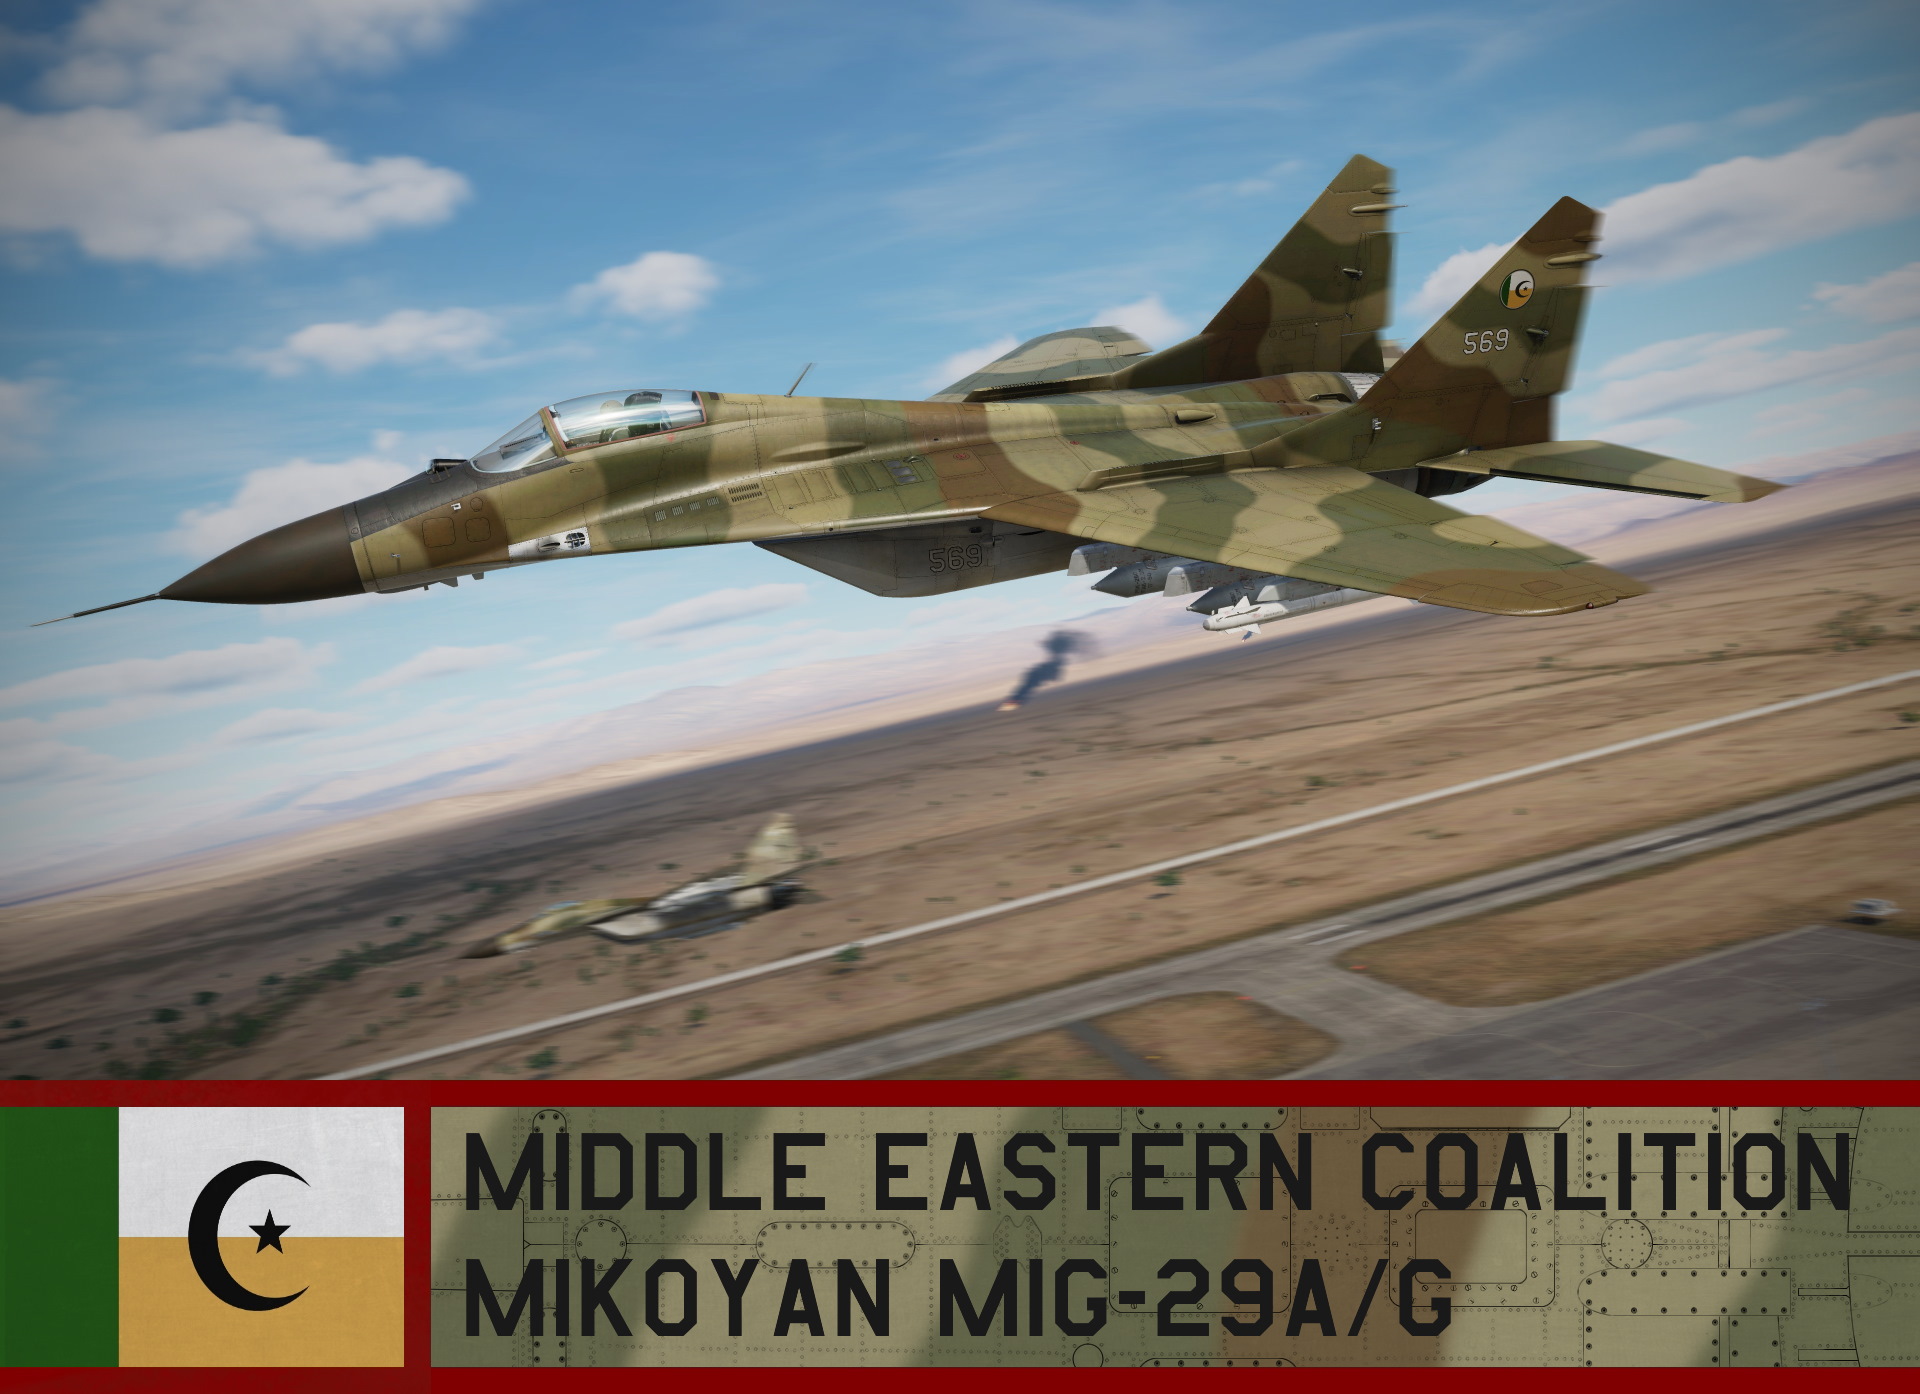 Middle Eastern Coalition Mig-29 A/G - Battlefield 2 